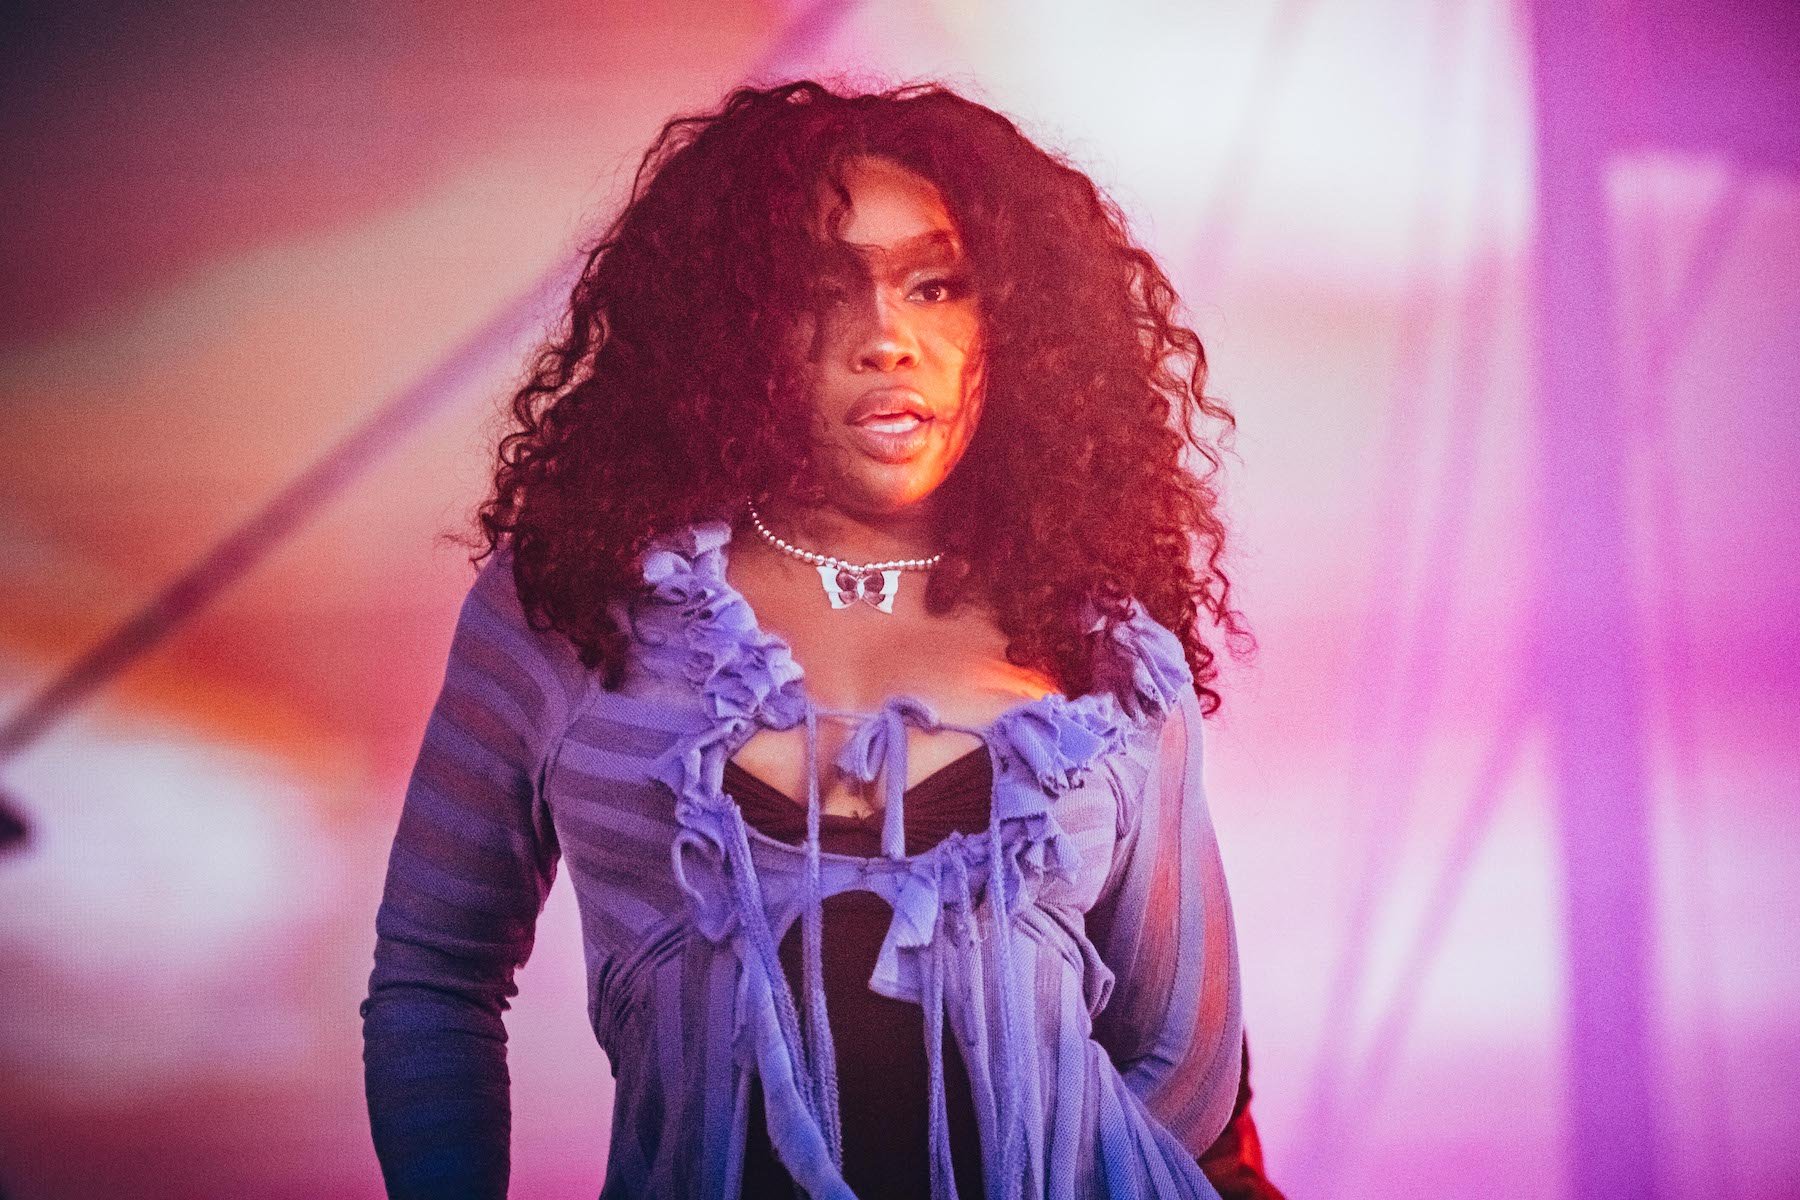 SNL musical guest SZA, who once dated Drake, on stage